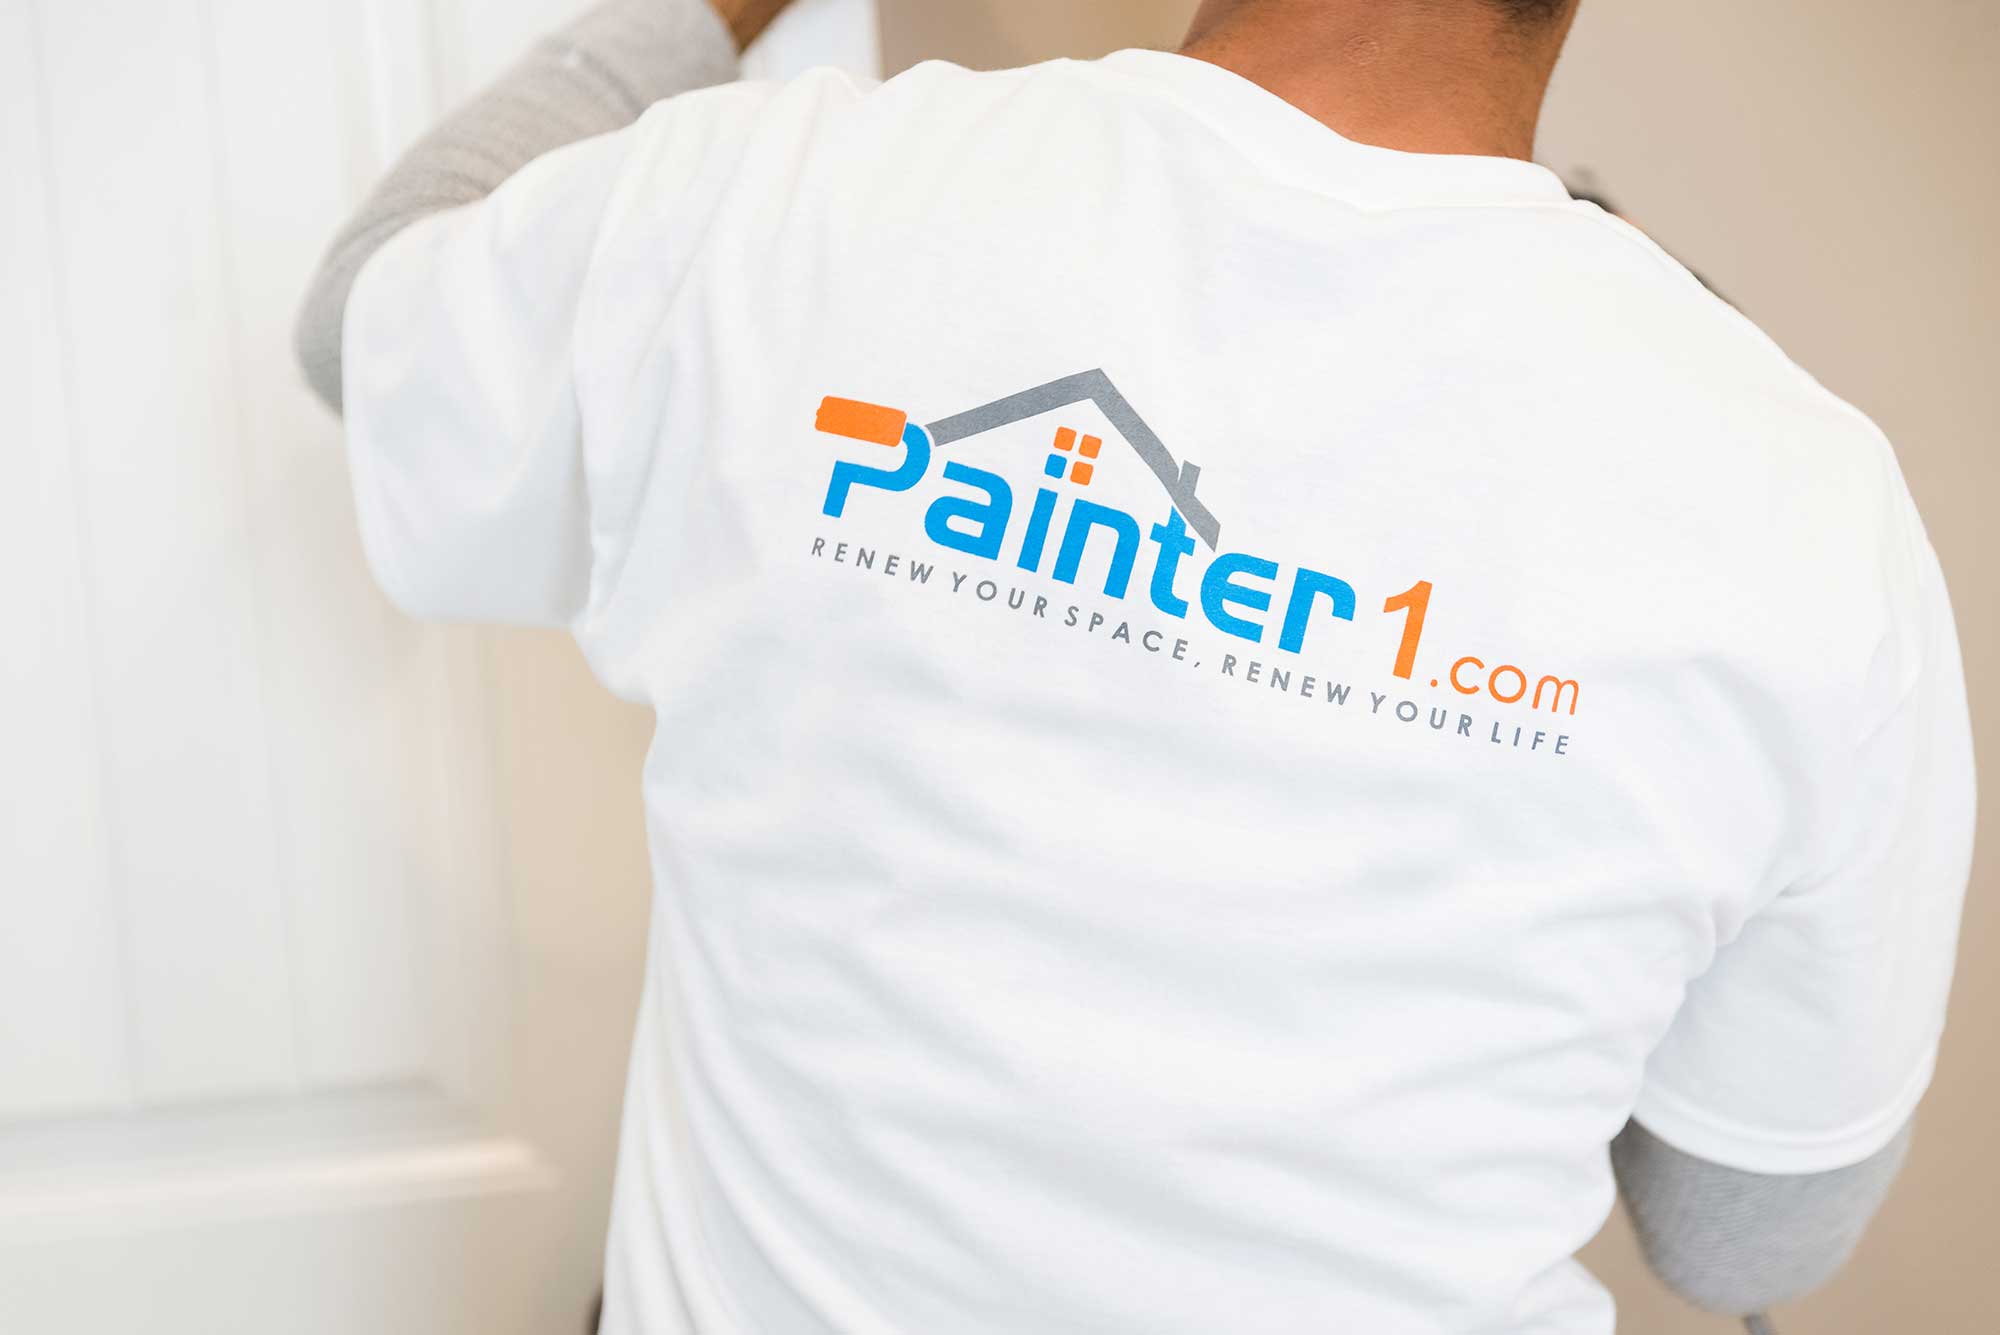 If you are searching for wallpaper removal in Memphis, Painter1 offers professional wallpaper removal in Memphis.